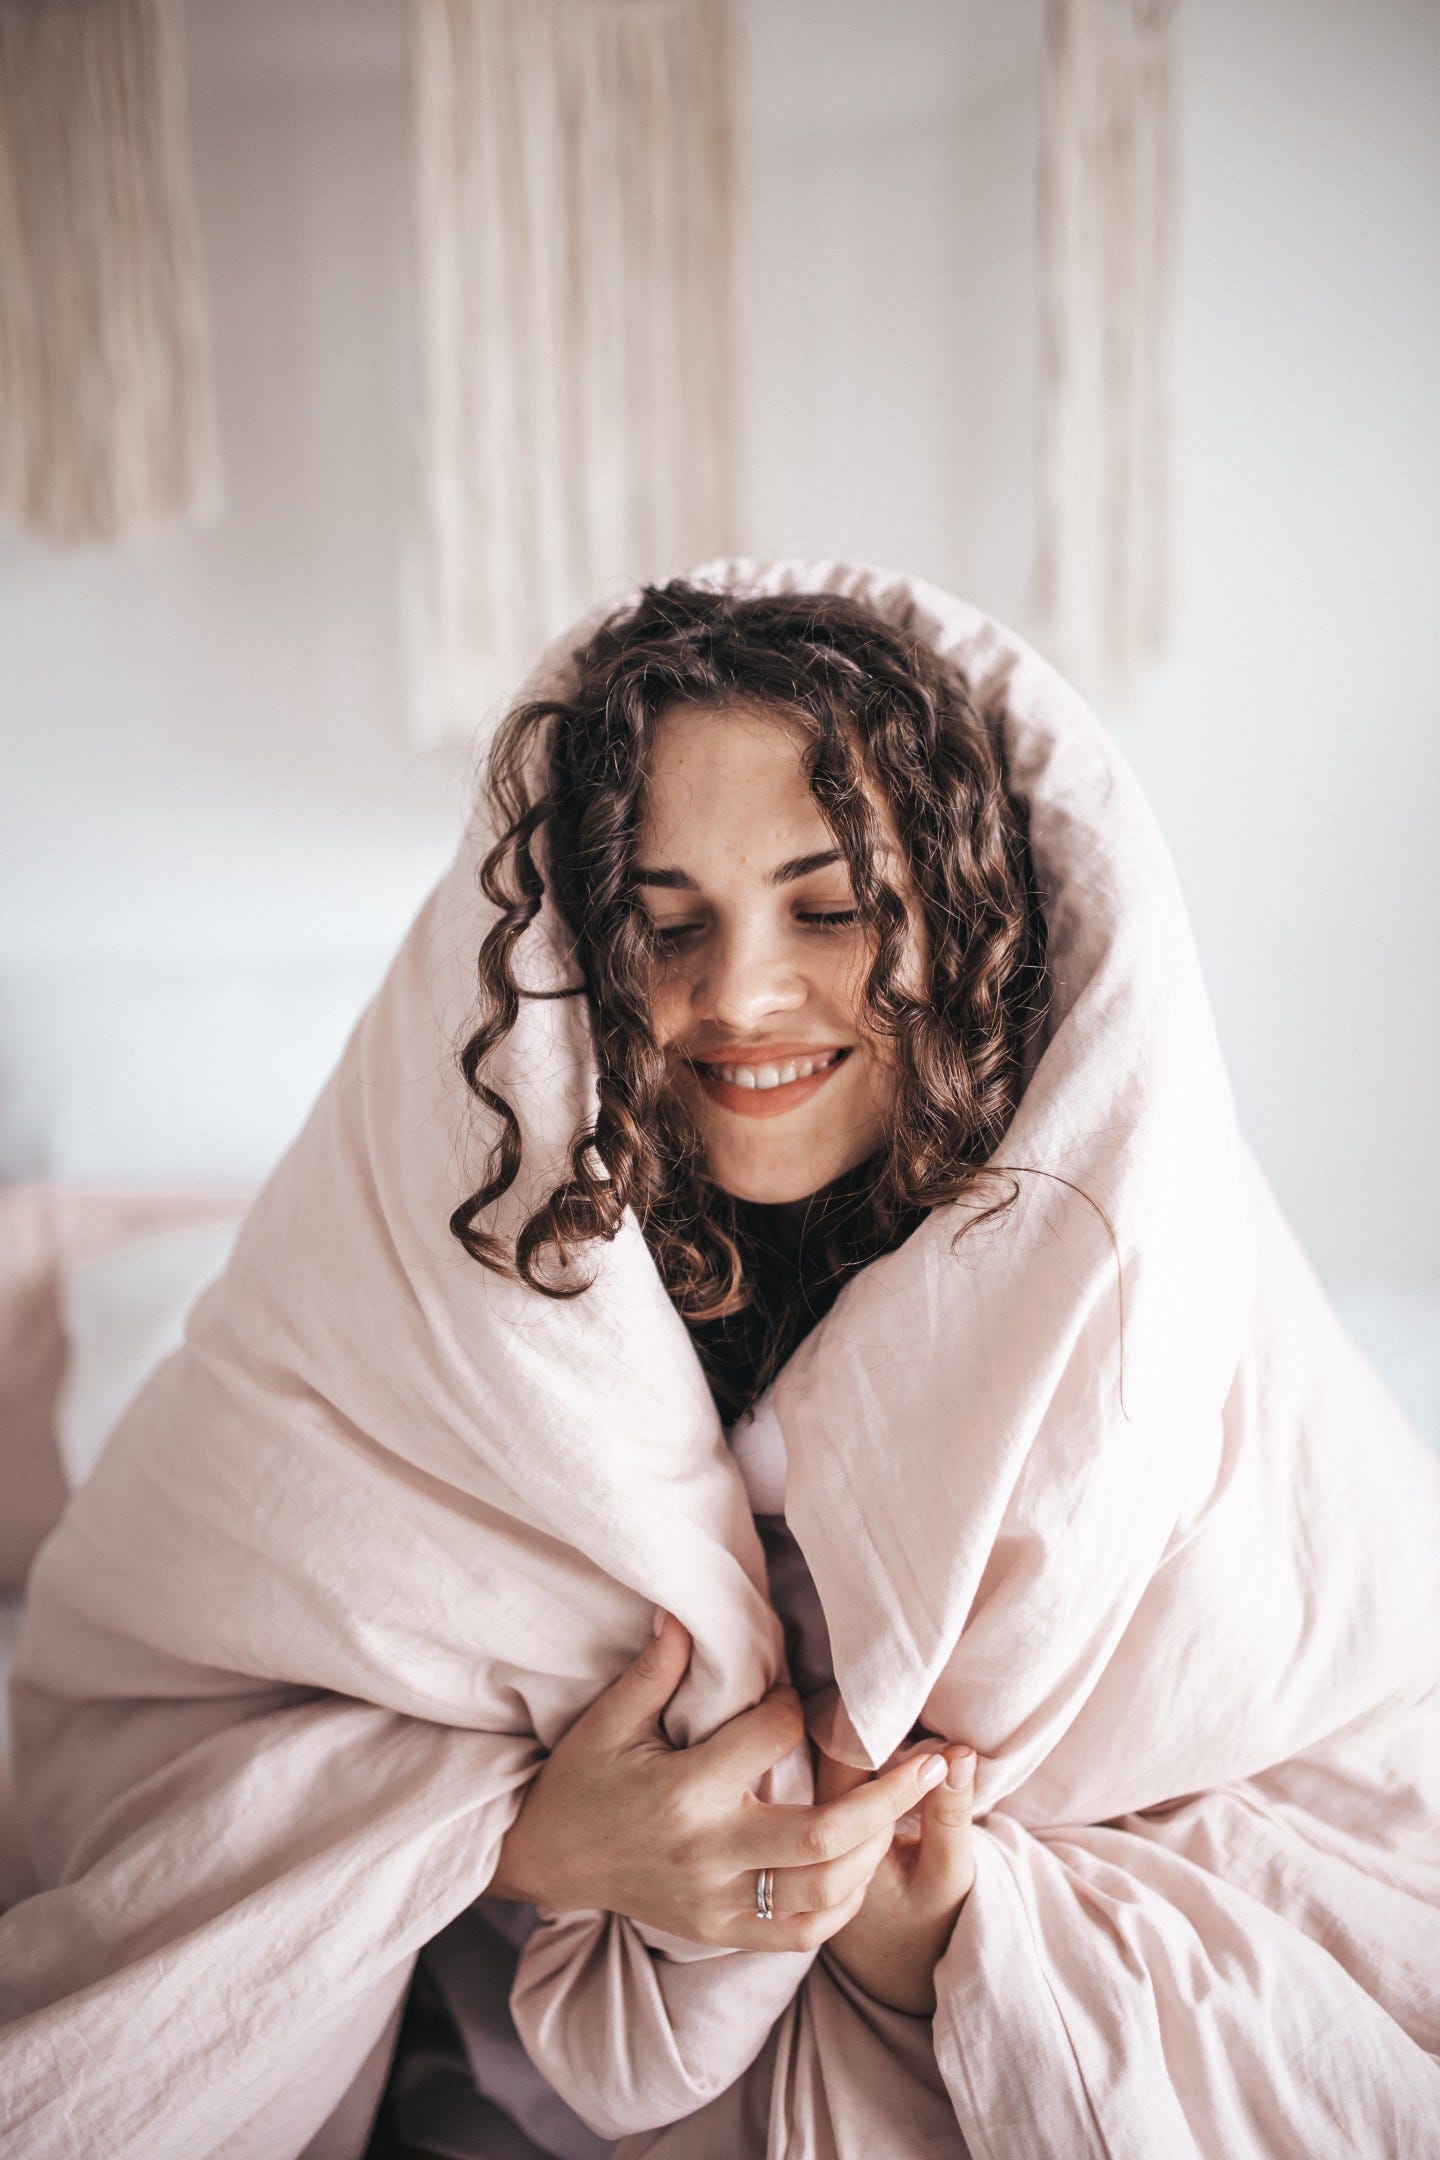 self-compassion embodied within a snuggly blanket